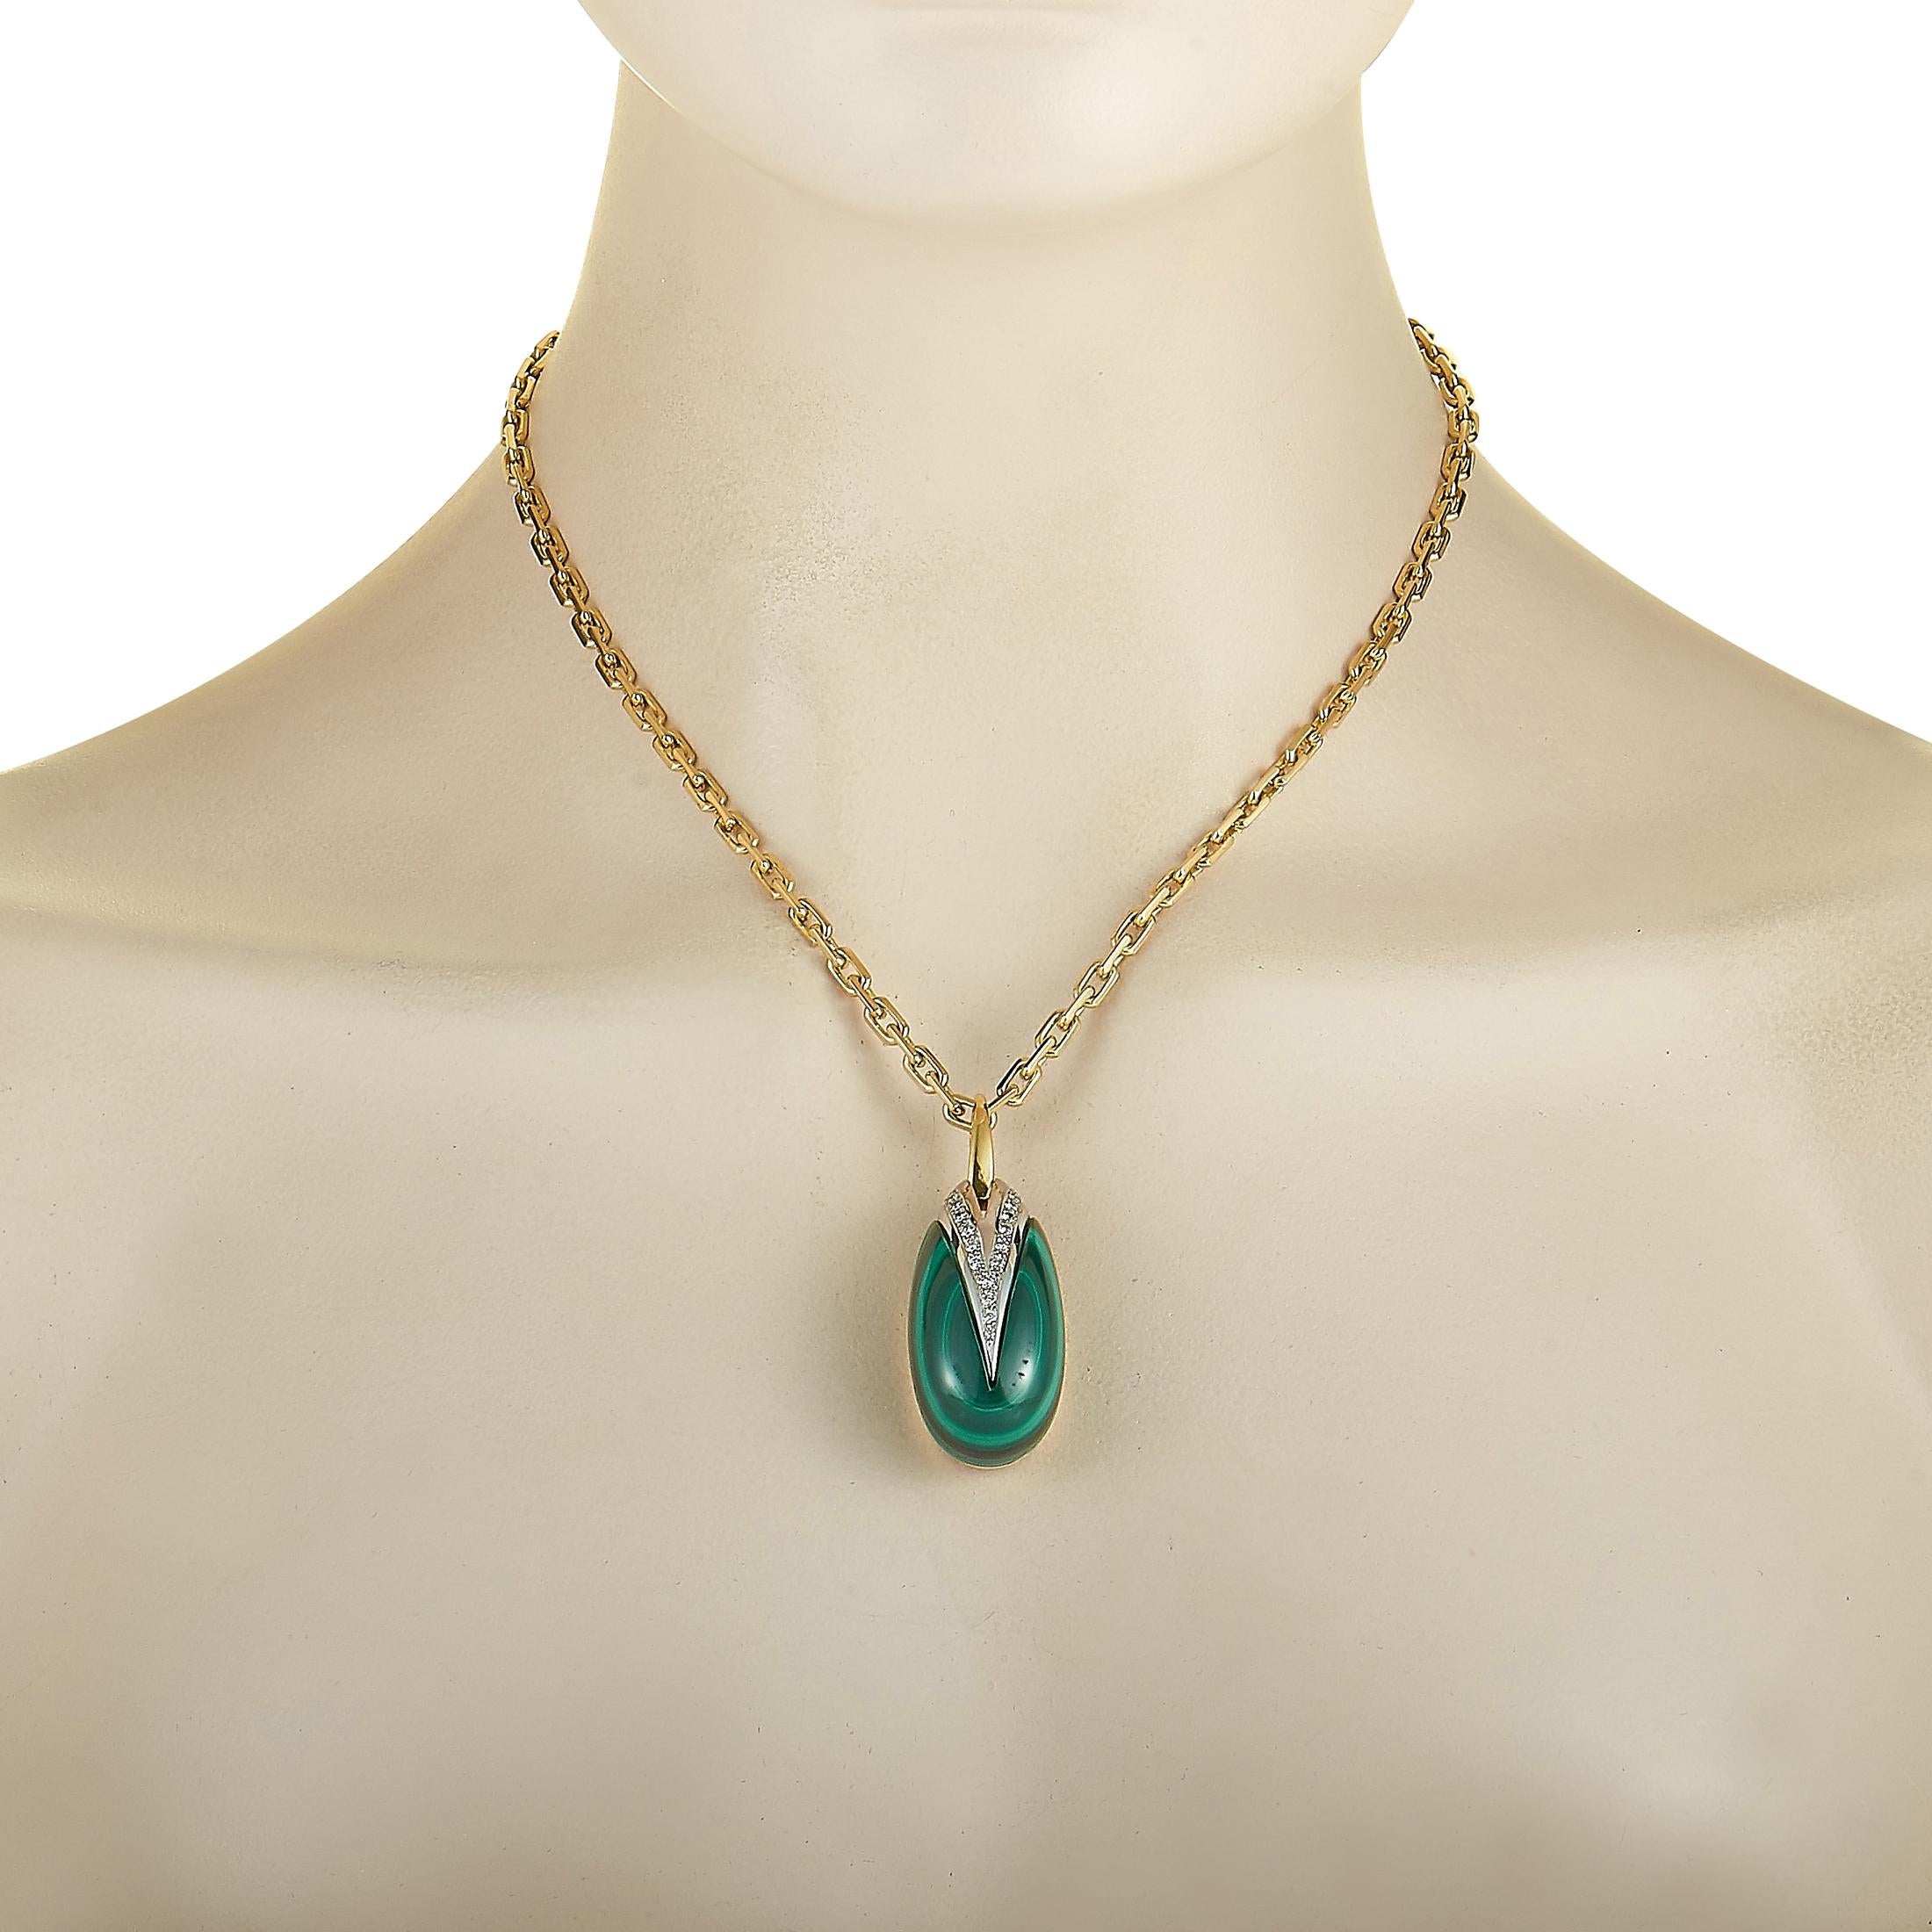 This LB Exclusive necklace is made out of 18K yellow and white gold, boasts a 17” chain and a pendant that measures 2” in length and 0.75” in width. The necklace weighs 63.8 grams. It is set with a malachite and a total of 0.55 carats of